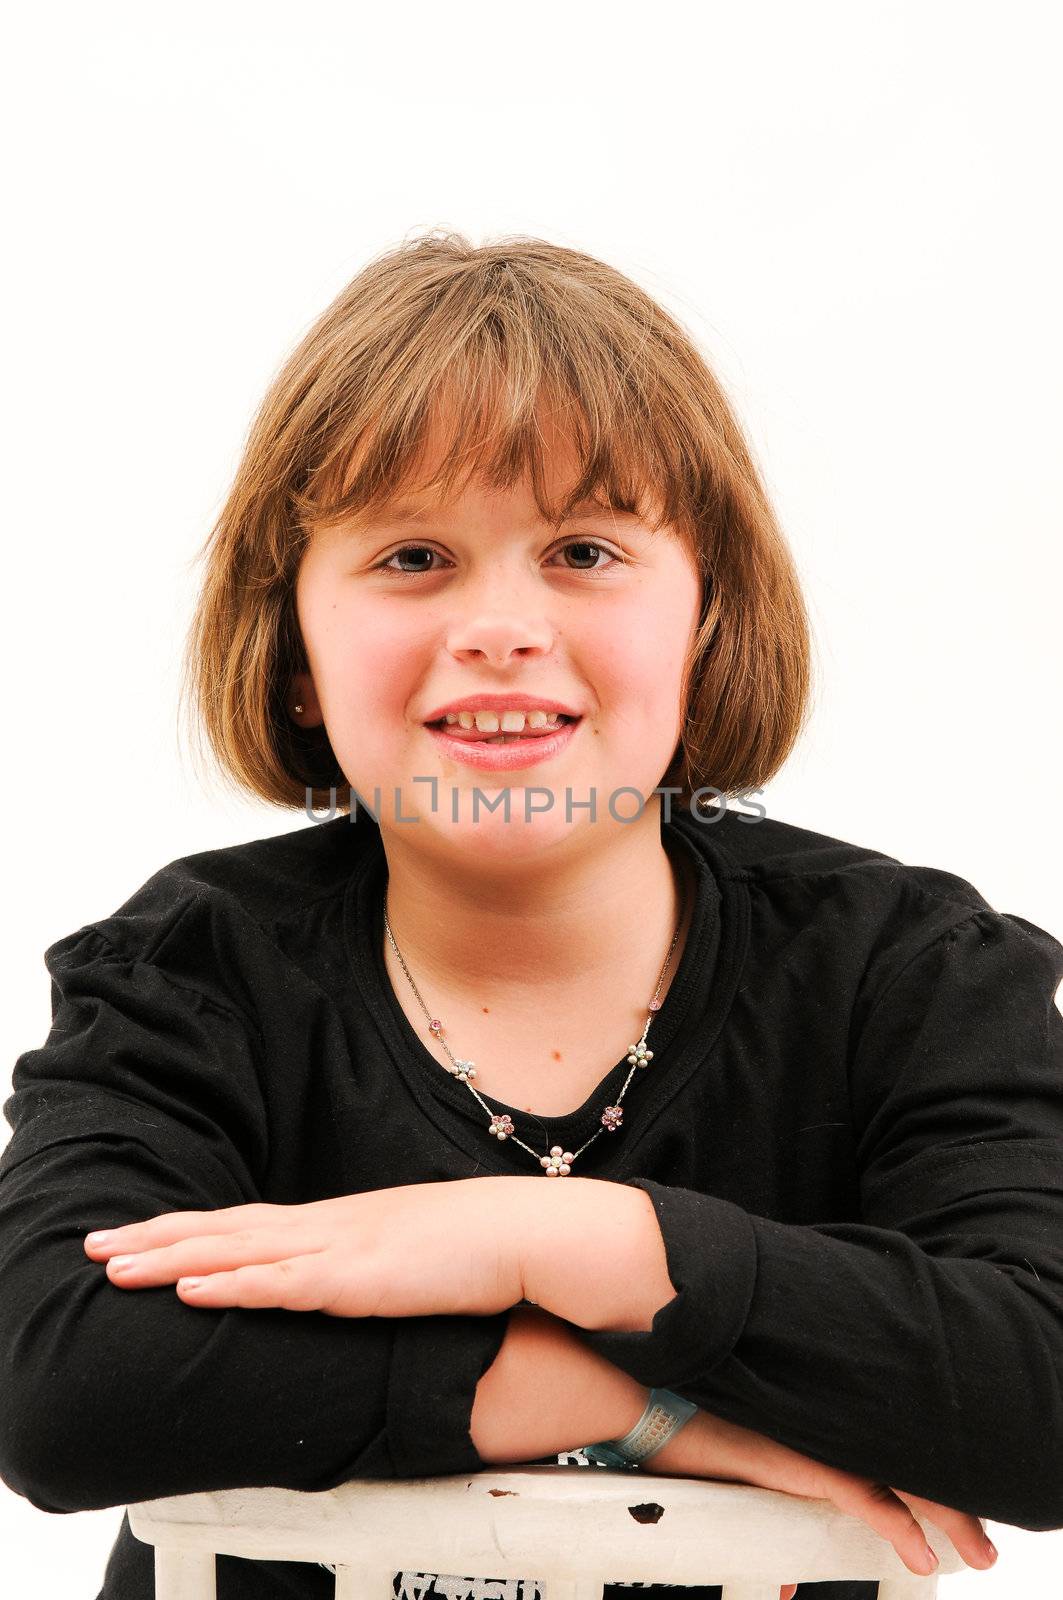 beautiful brown hair teenager smiling with dimple in cheek sitting on chair by Ansunette